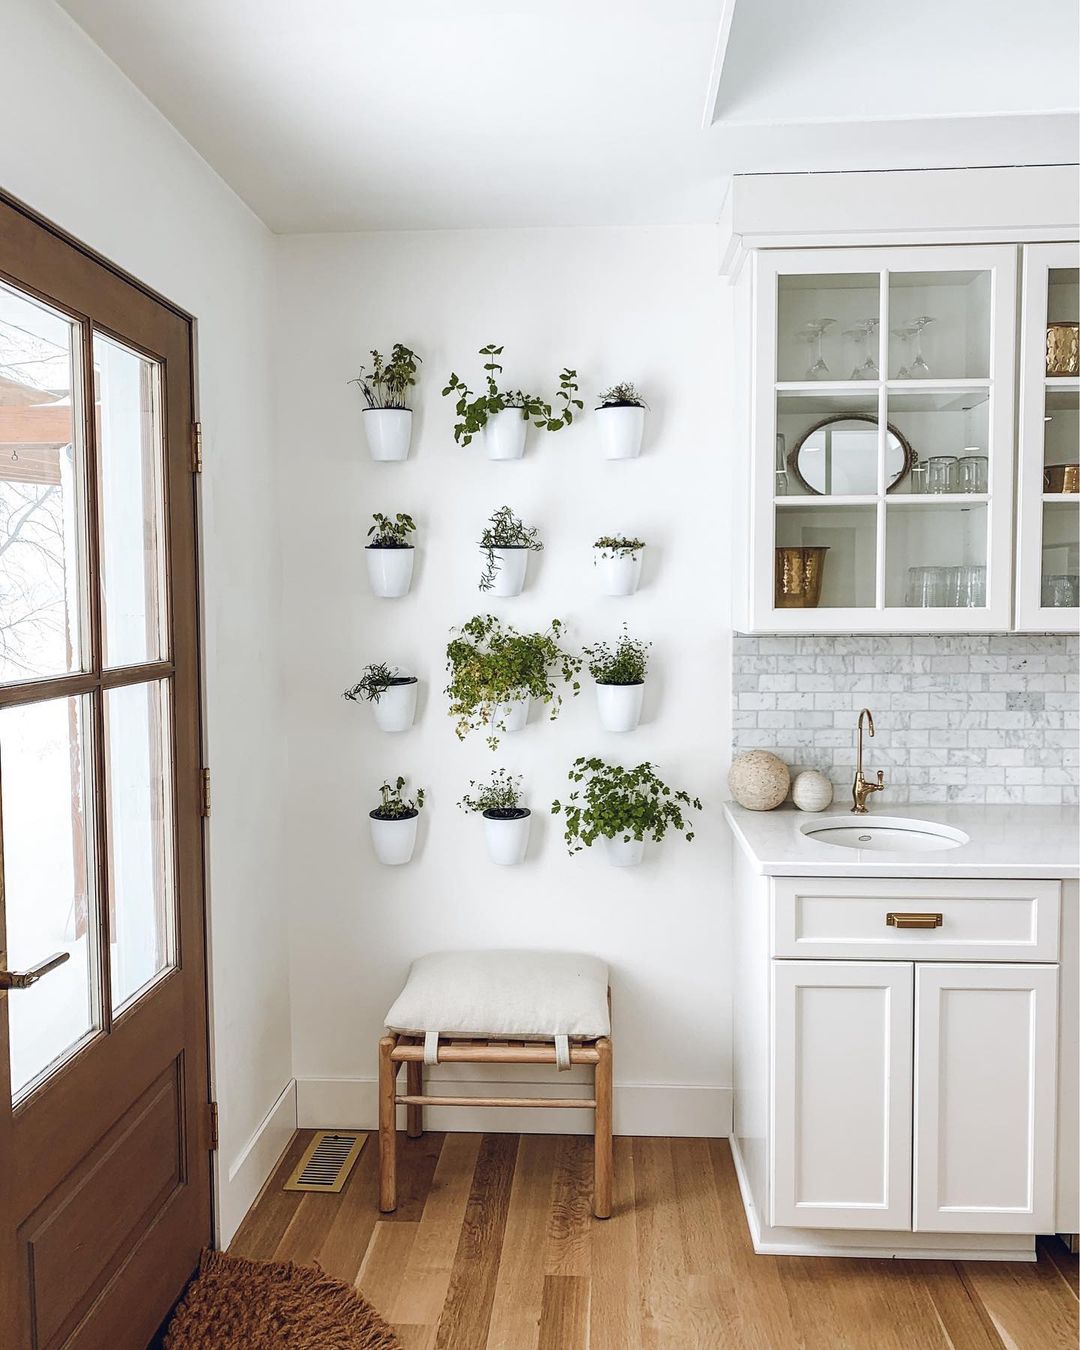 Kitchen wall featuring 12 mounted pots with different herbs growing. Photo by Instagram user @thepenparty.